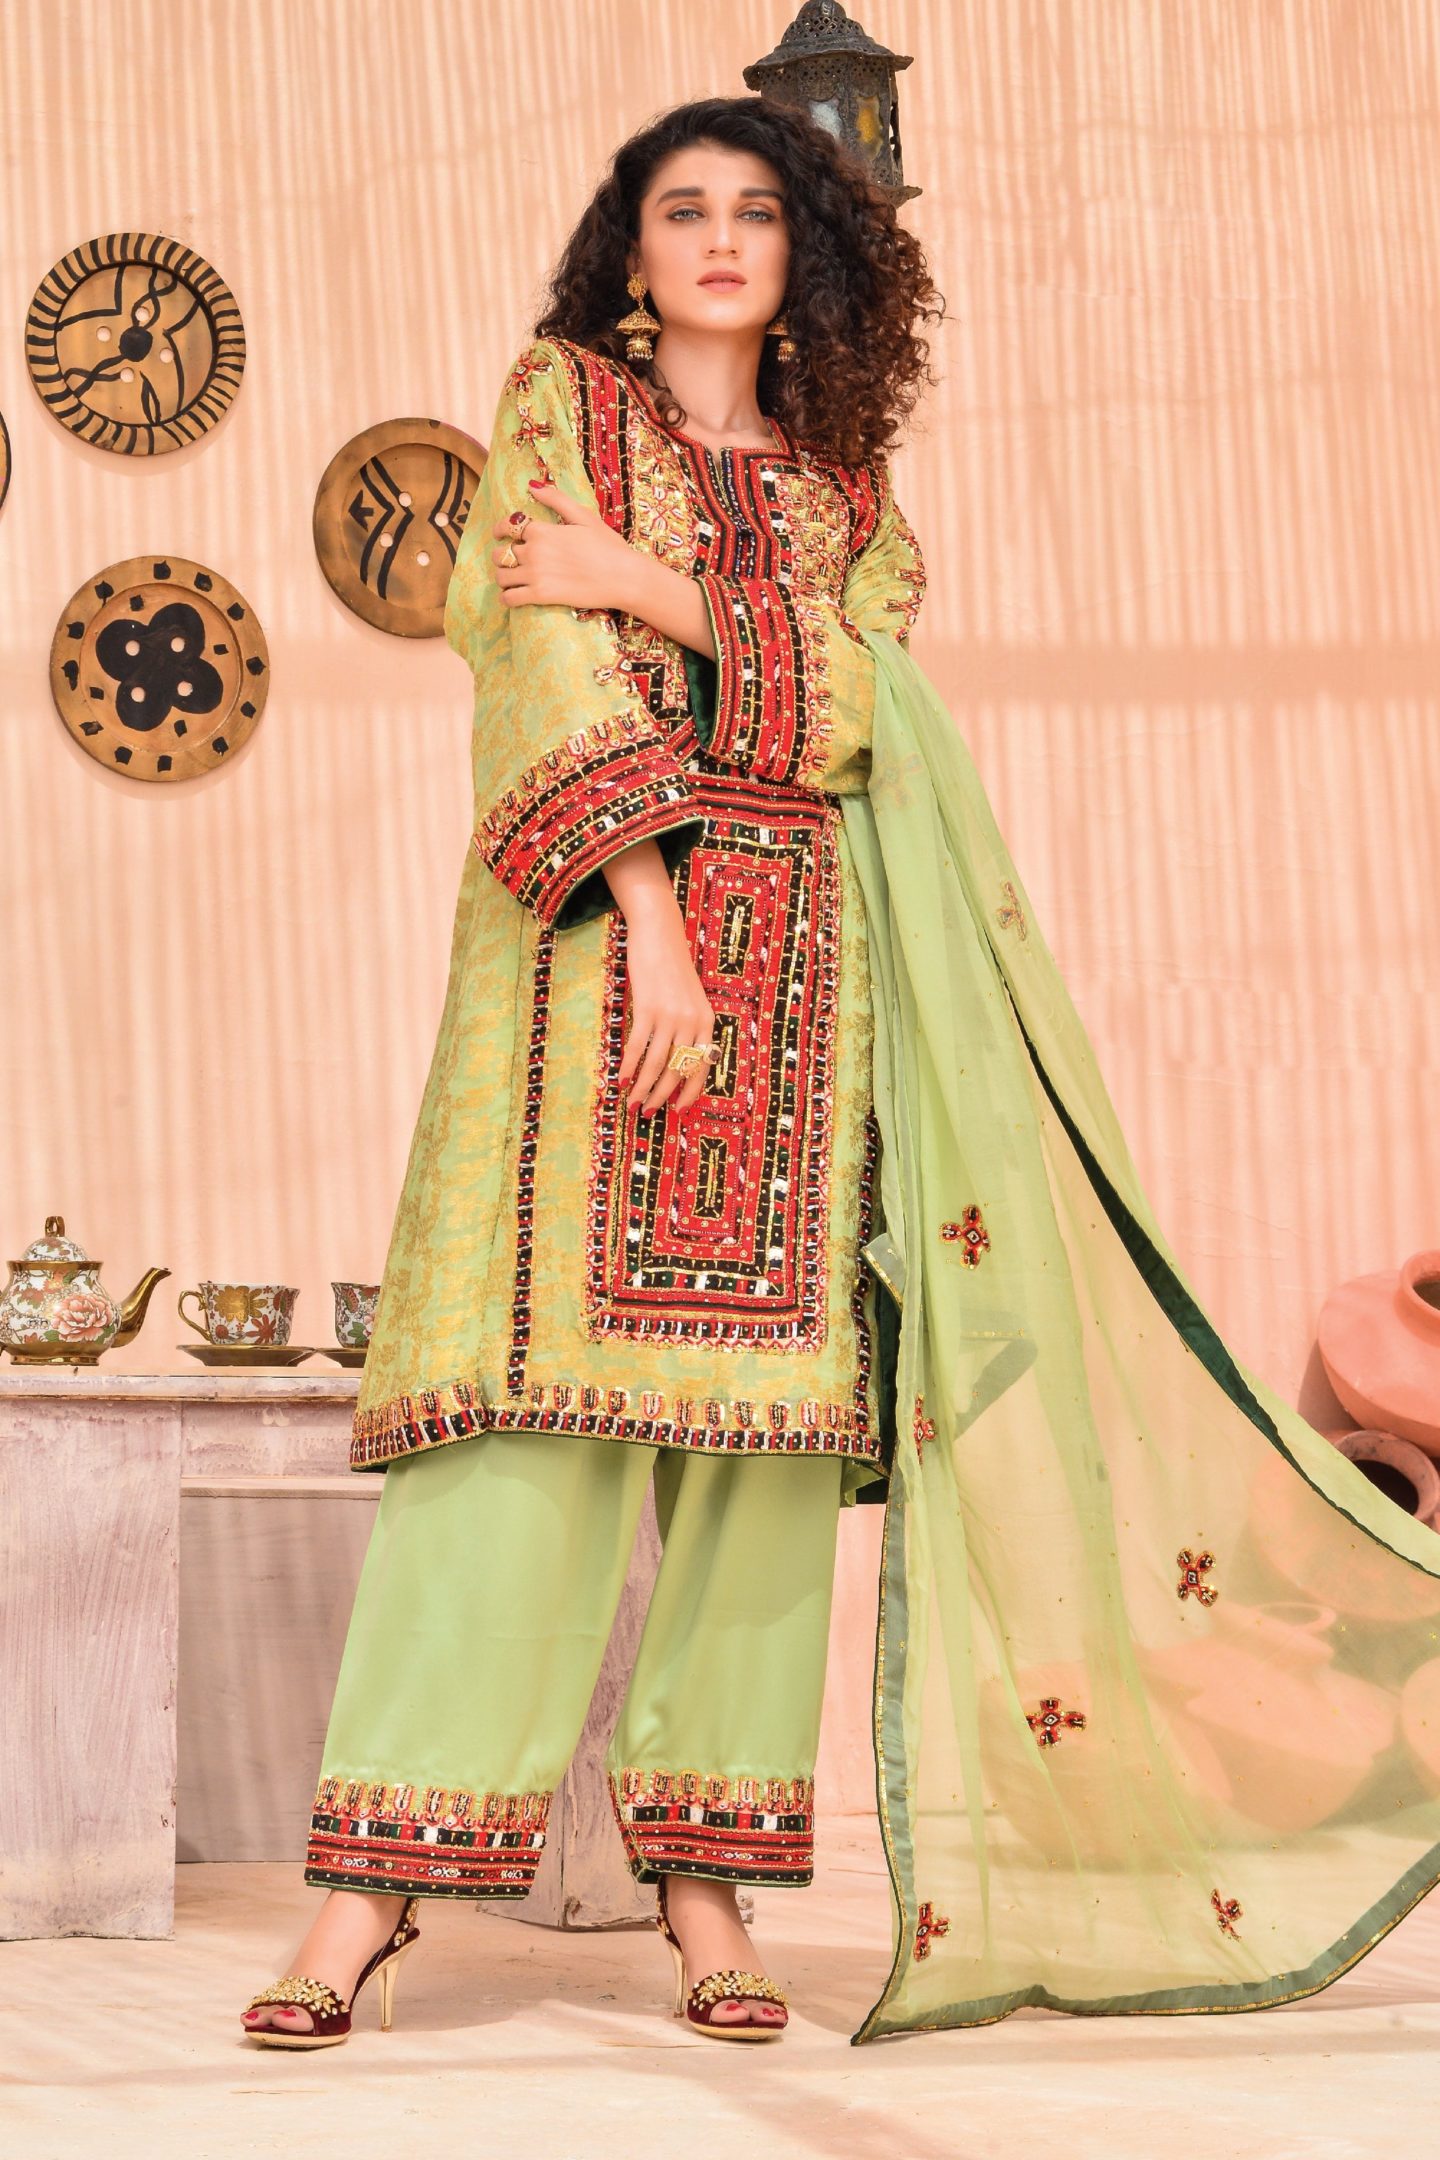 Haseen's Picture Perfect Luxury 'Balochi' Collection - Salwar Kameez